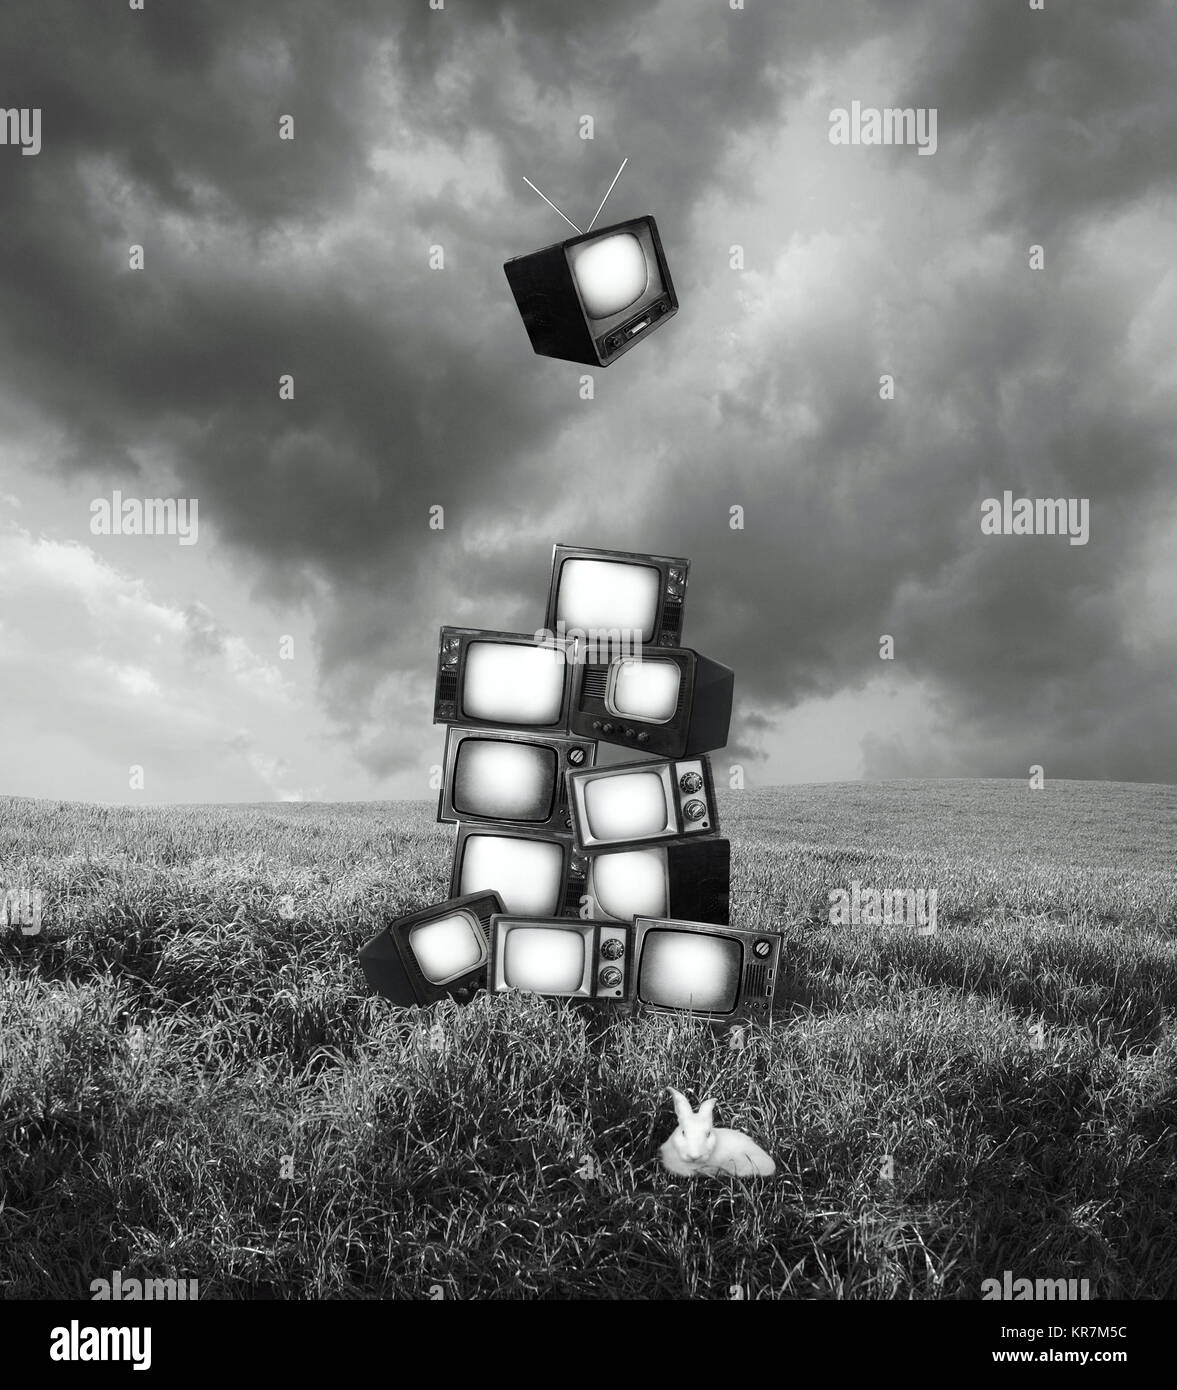 Beautiful artistic surreal image representing a landscape with piled up old televisions and a white rabbit in black and white Stock Photo